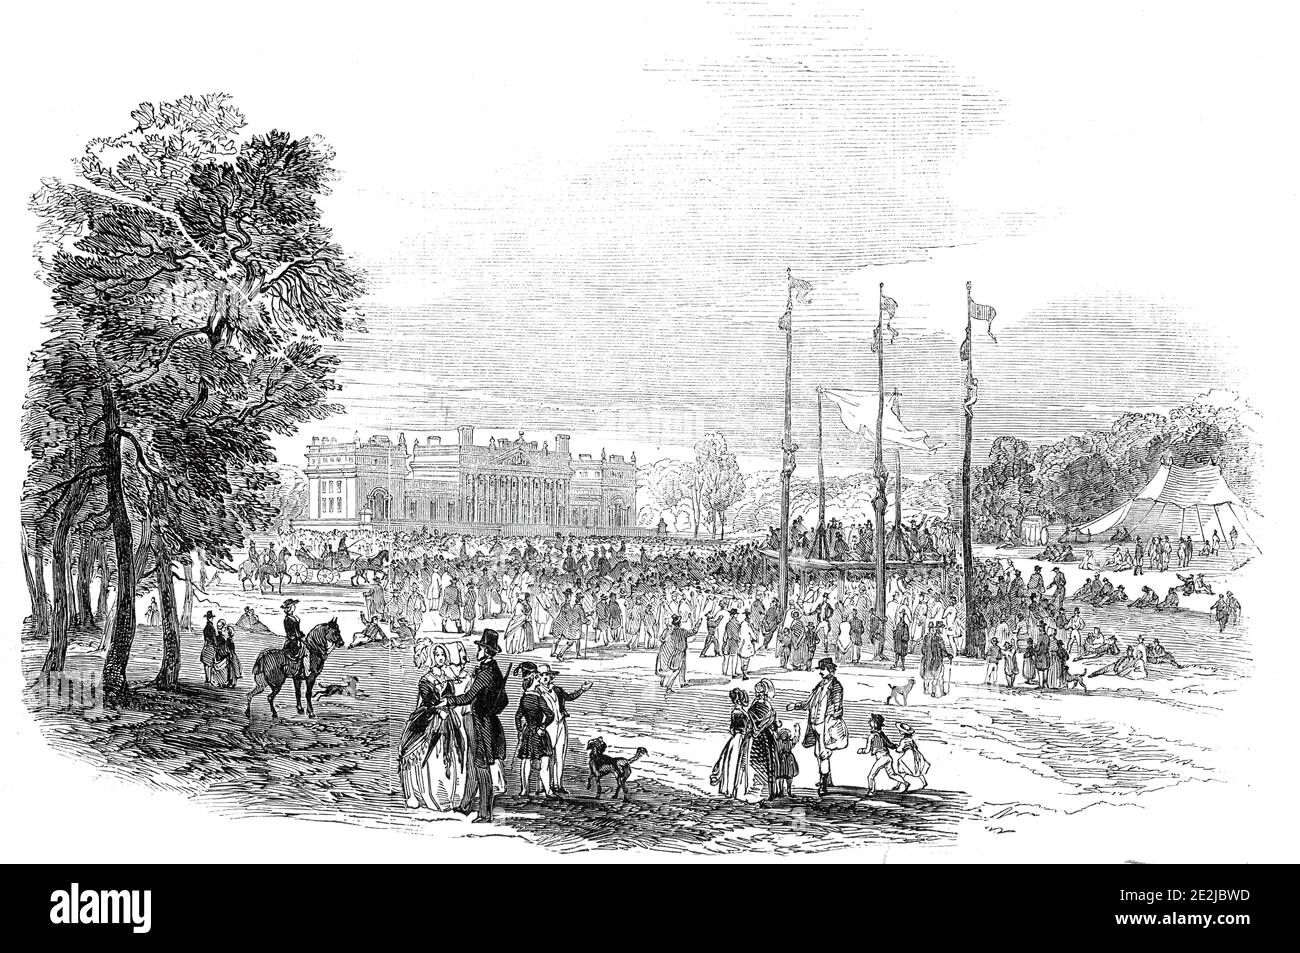 Rustic sports in the Park - north view of Harewood House, 1845. Celebrations at Harewood House near Leeds in Yorkshire. 'The events which gave rise to the Festival were the Coming of Age, and Marriage, of Lord Viscount Lascelles, the eldest son of the present Earl of Harewood...The juvenile company adjourned to the lawn opposite the north front, where the boys amused the girls by playing at football, bobbing for apples in water, diving for silver in flour, dancing, &amp;c., until dark; when they returned home, and were amused in their way in the village with fire balloons and fireworks'. From Stock Photo